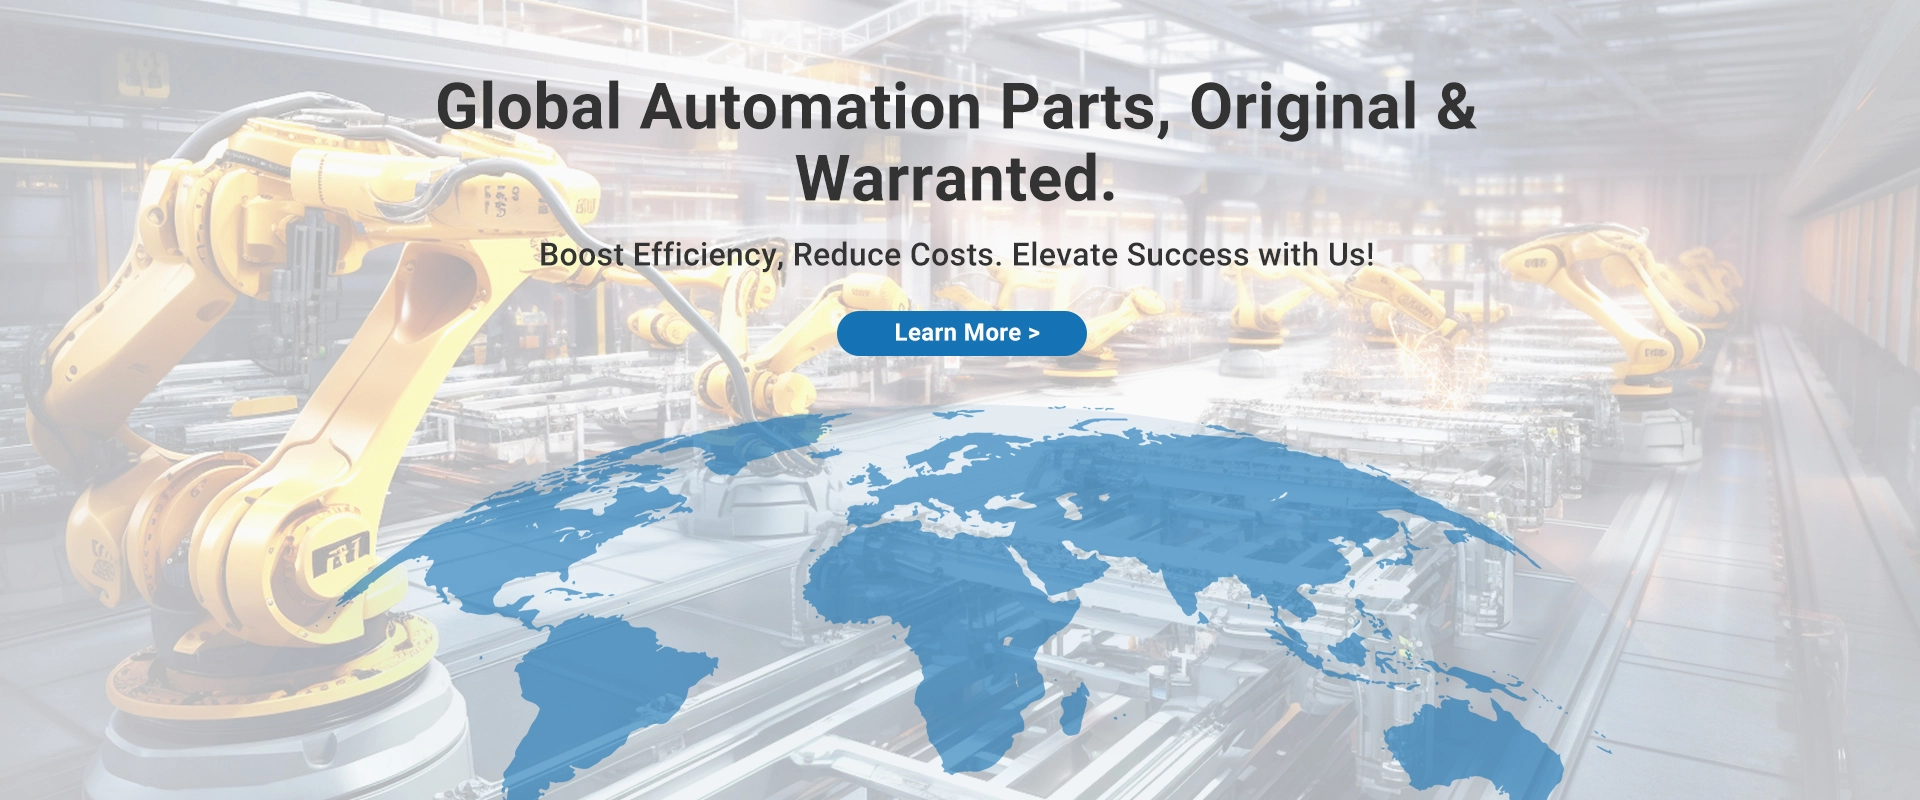 Global Industrial Automation Parts, Original & Warranted